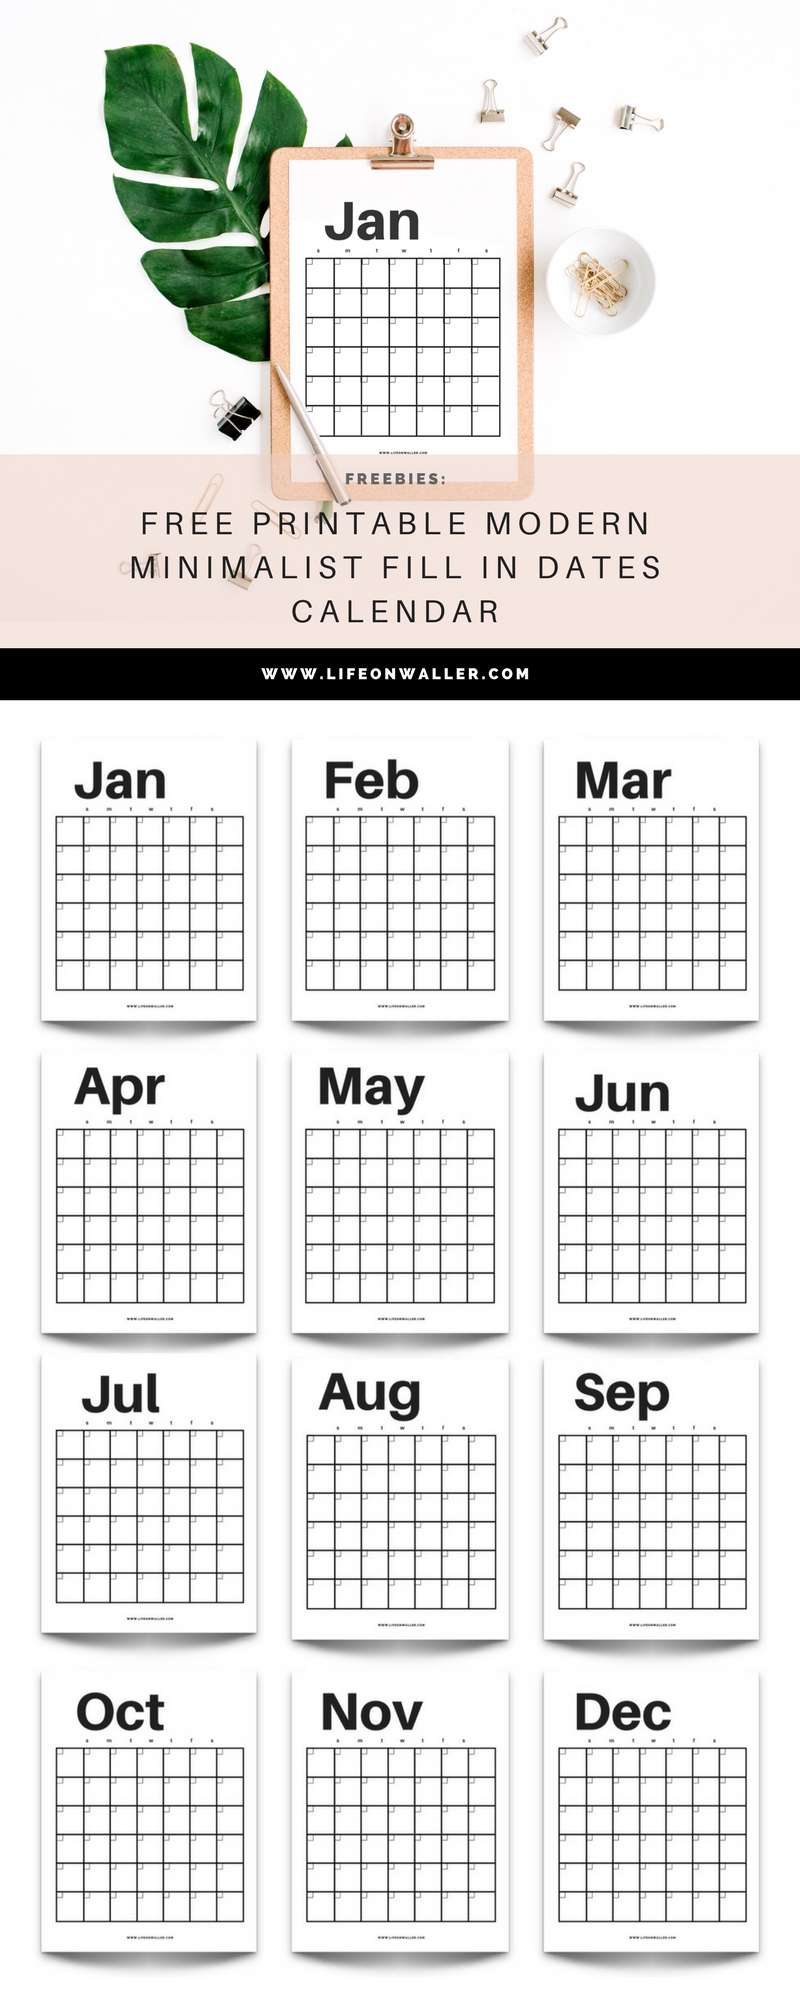 Free Printable Modern Minimalist Fill In Calendar - Use For